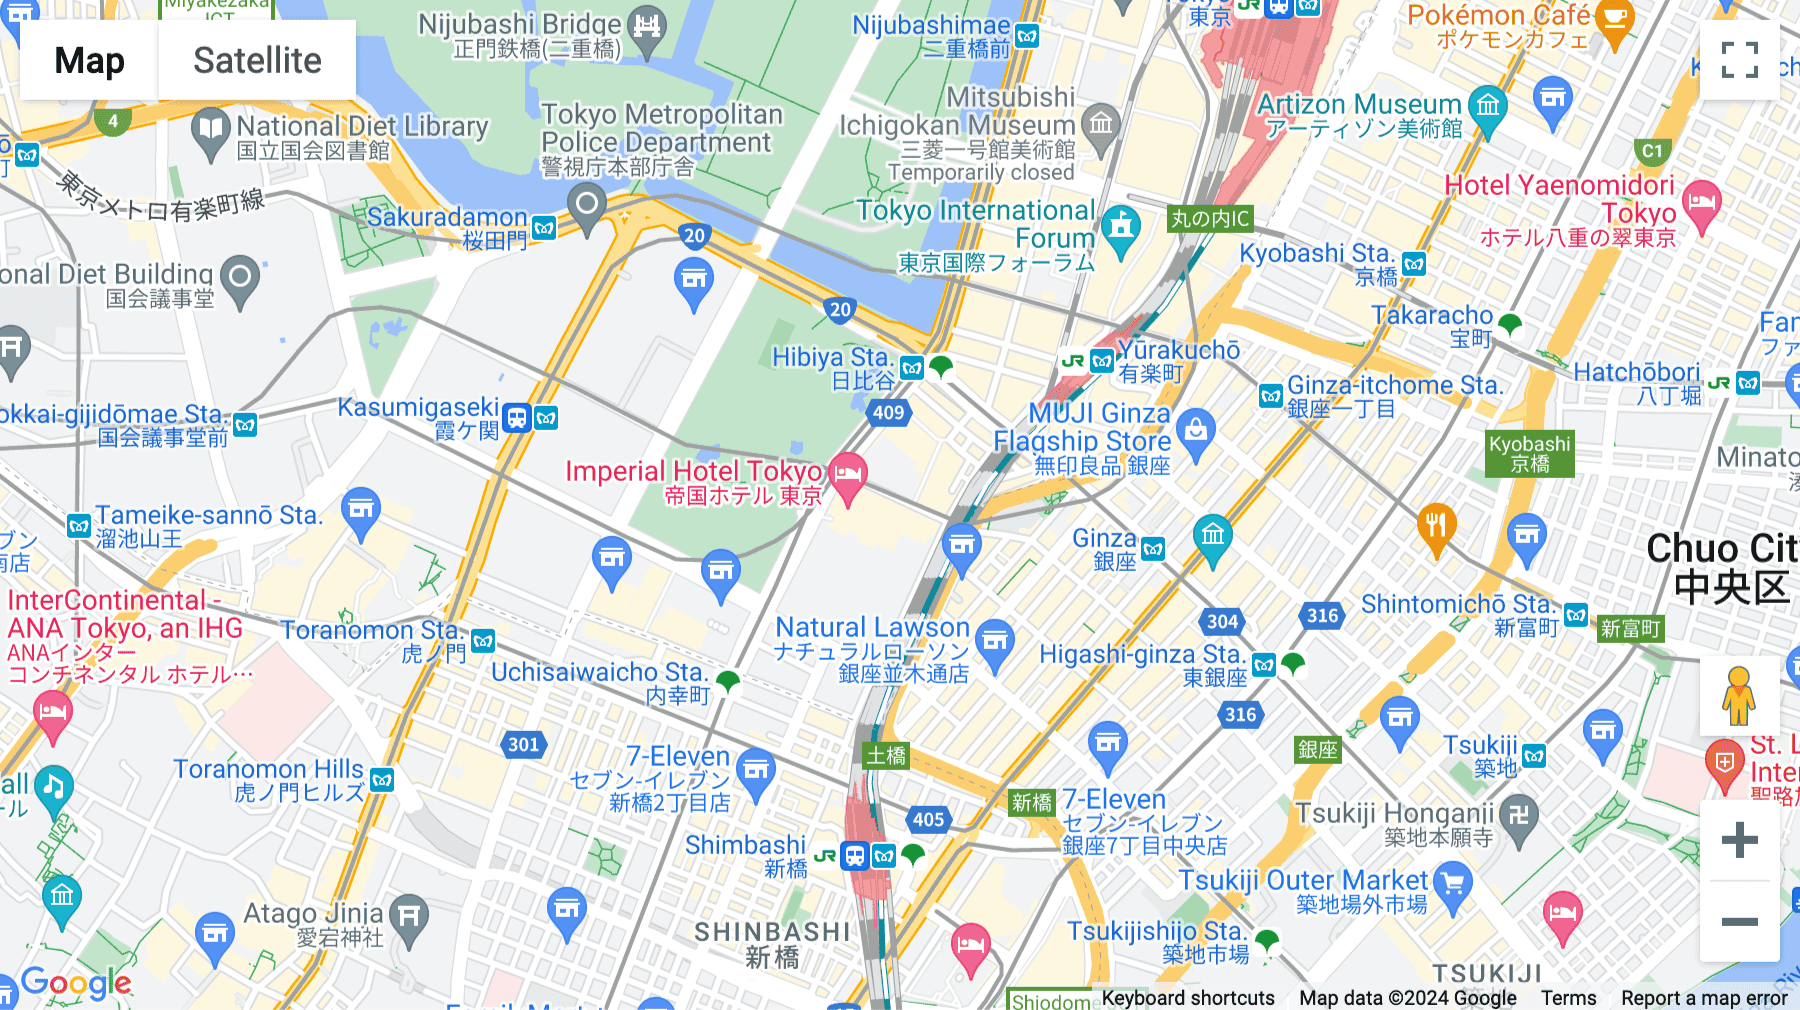 Click for interative map of Imperial Hotel Tower, 1-1-1 Uchisaiwaicho, 15th Floor, Tokyo